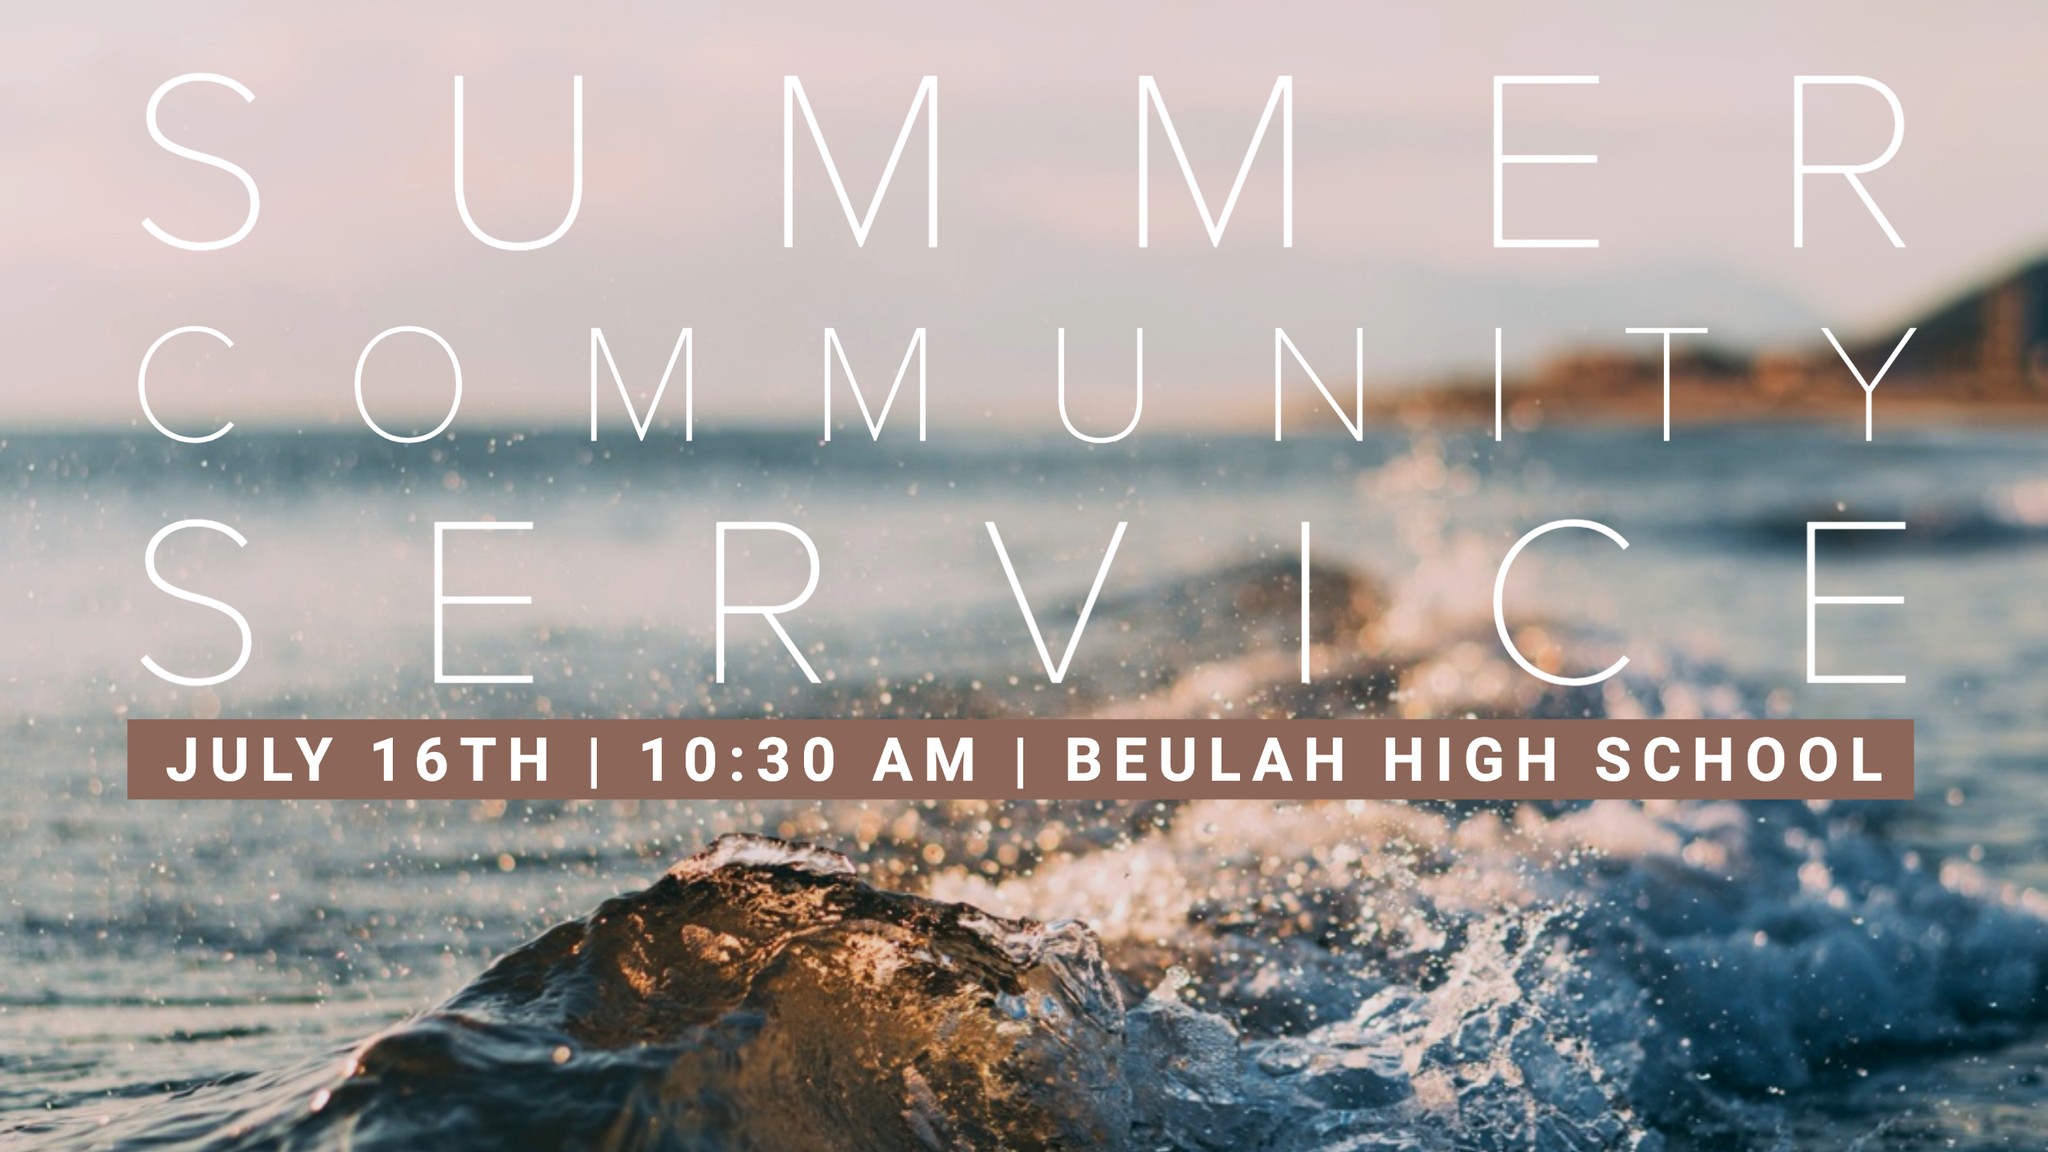 Event Promo Photo For Beulah Ministerial Annual Community Service